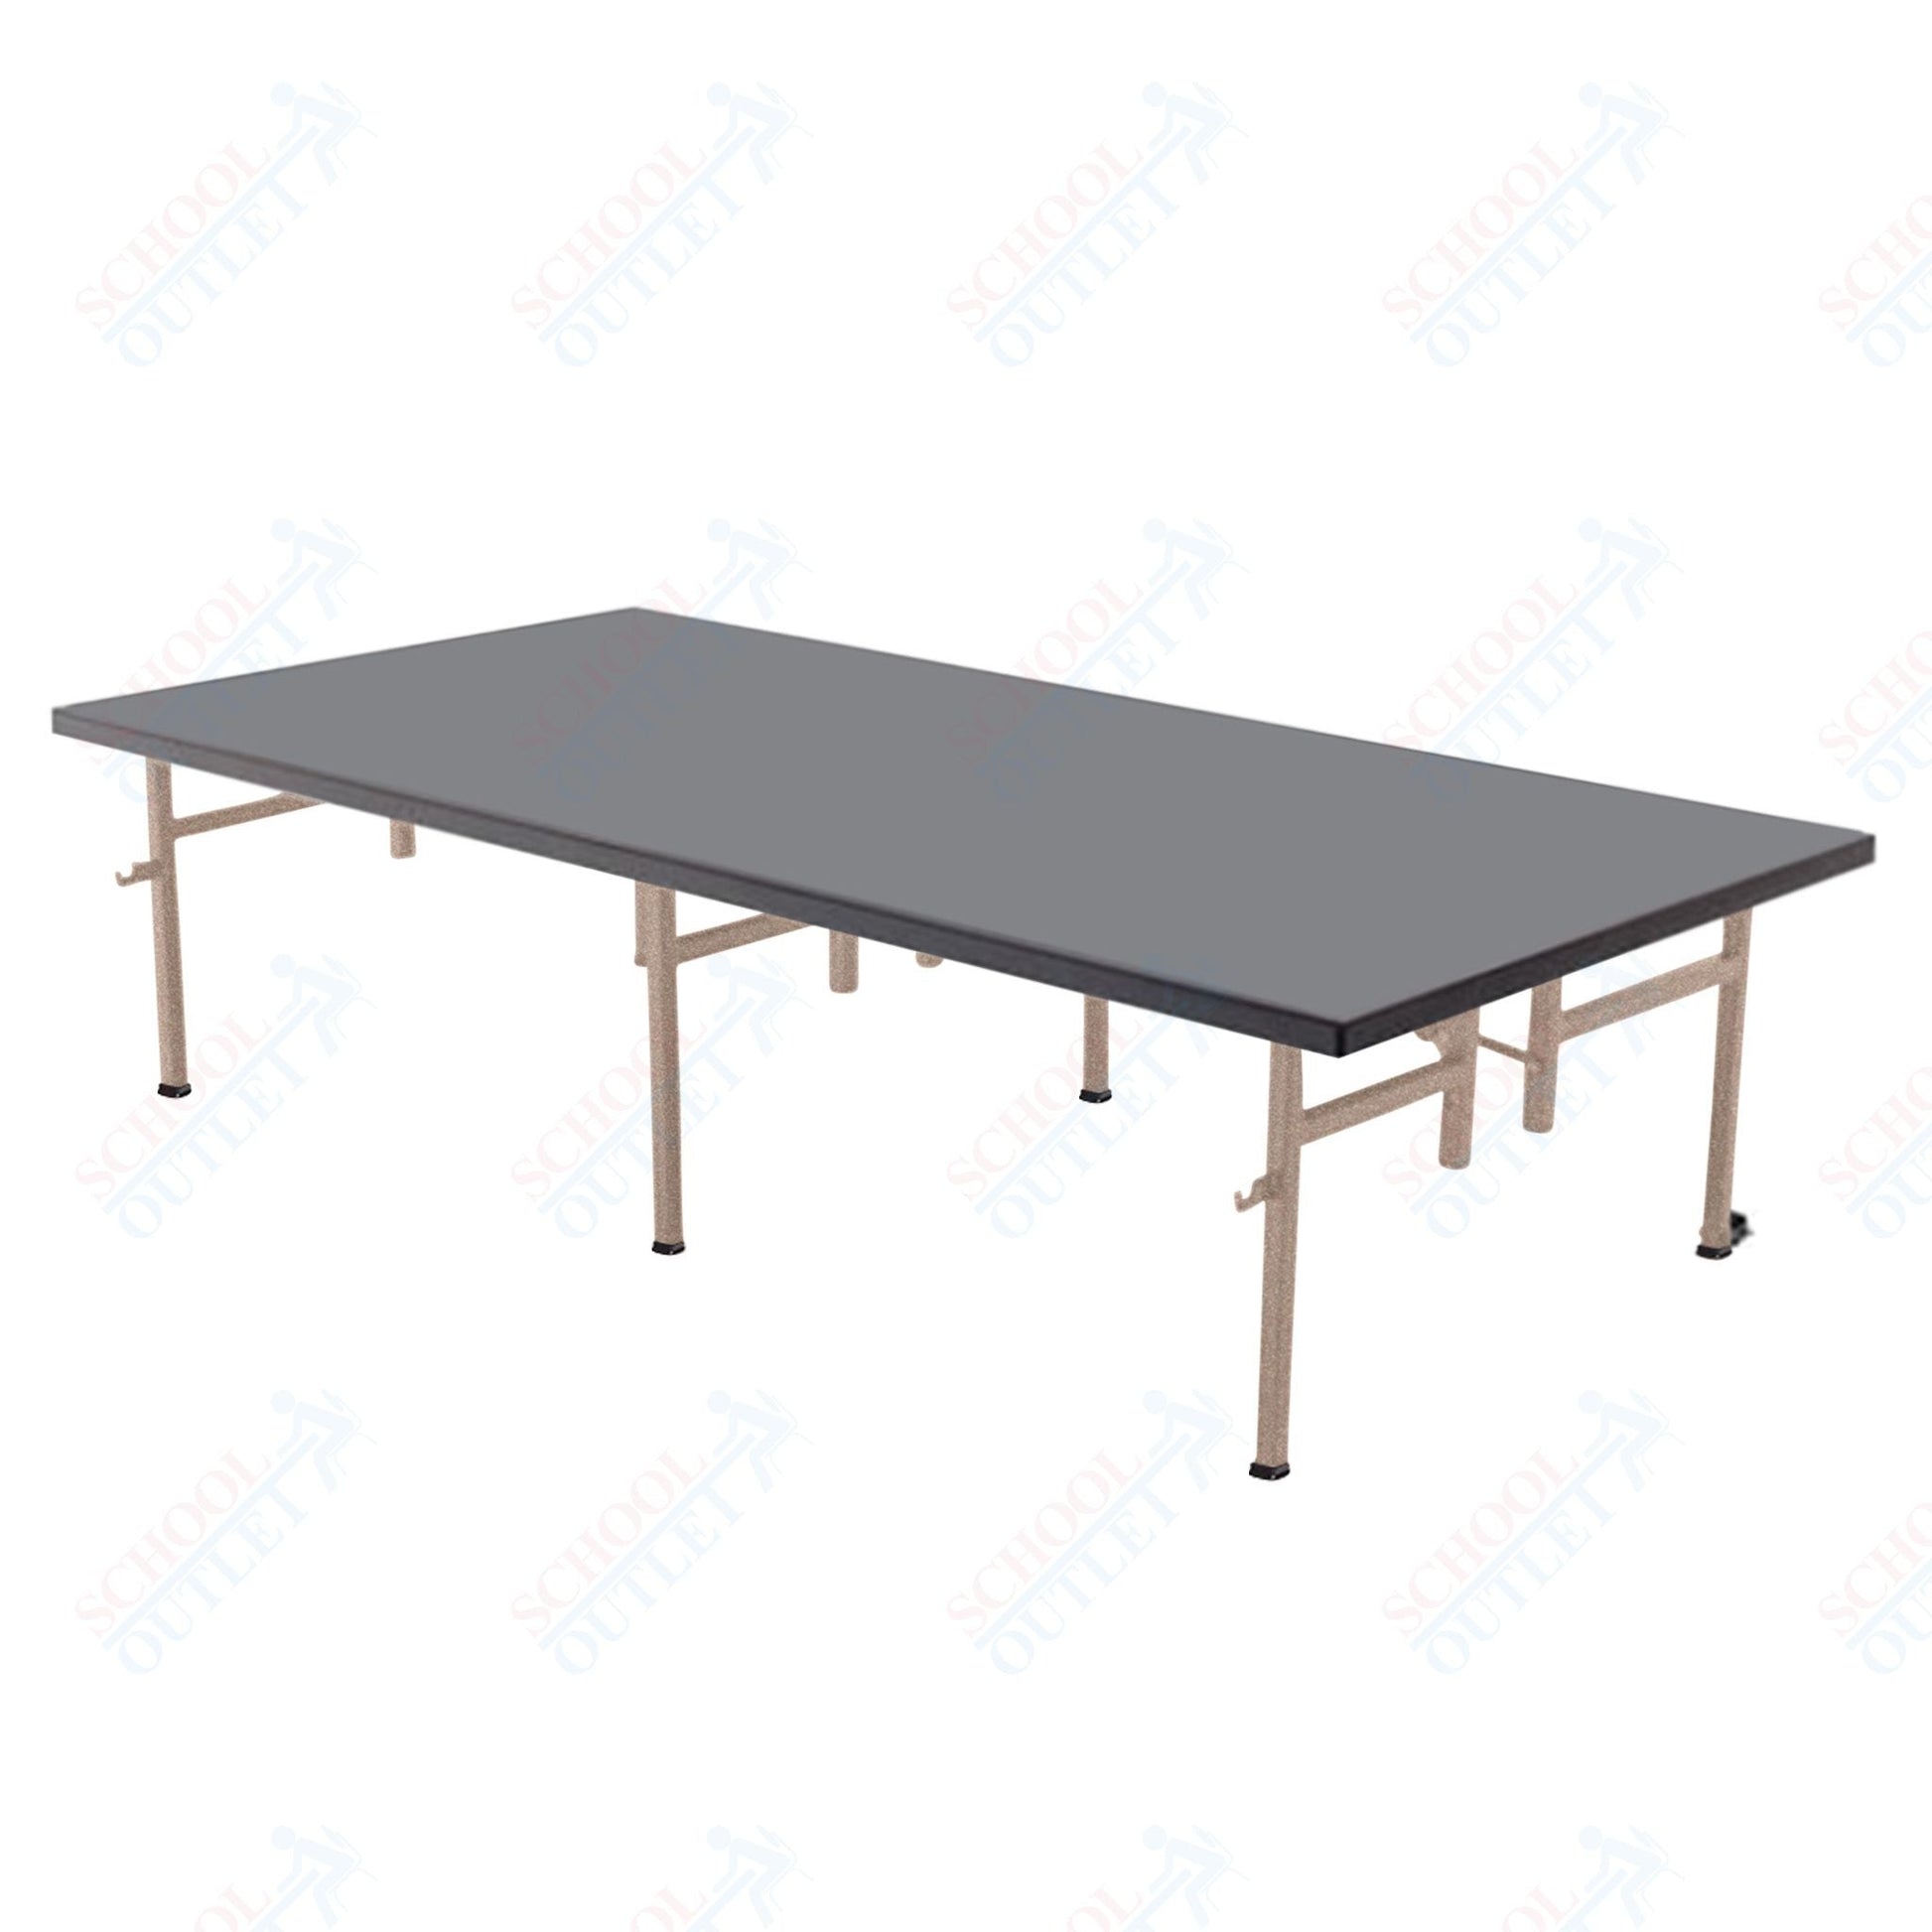 AmTab Fixed Height Stage - Polypropylene Top - 36"W x 72"L x 24"H (AmTab AMT - ST3624P) - SchoolOutlet